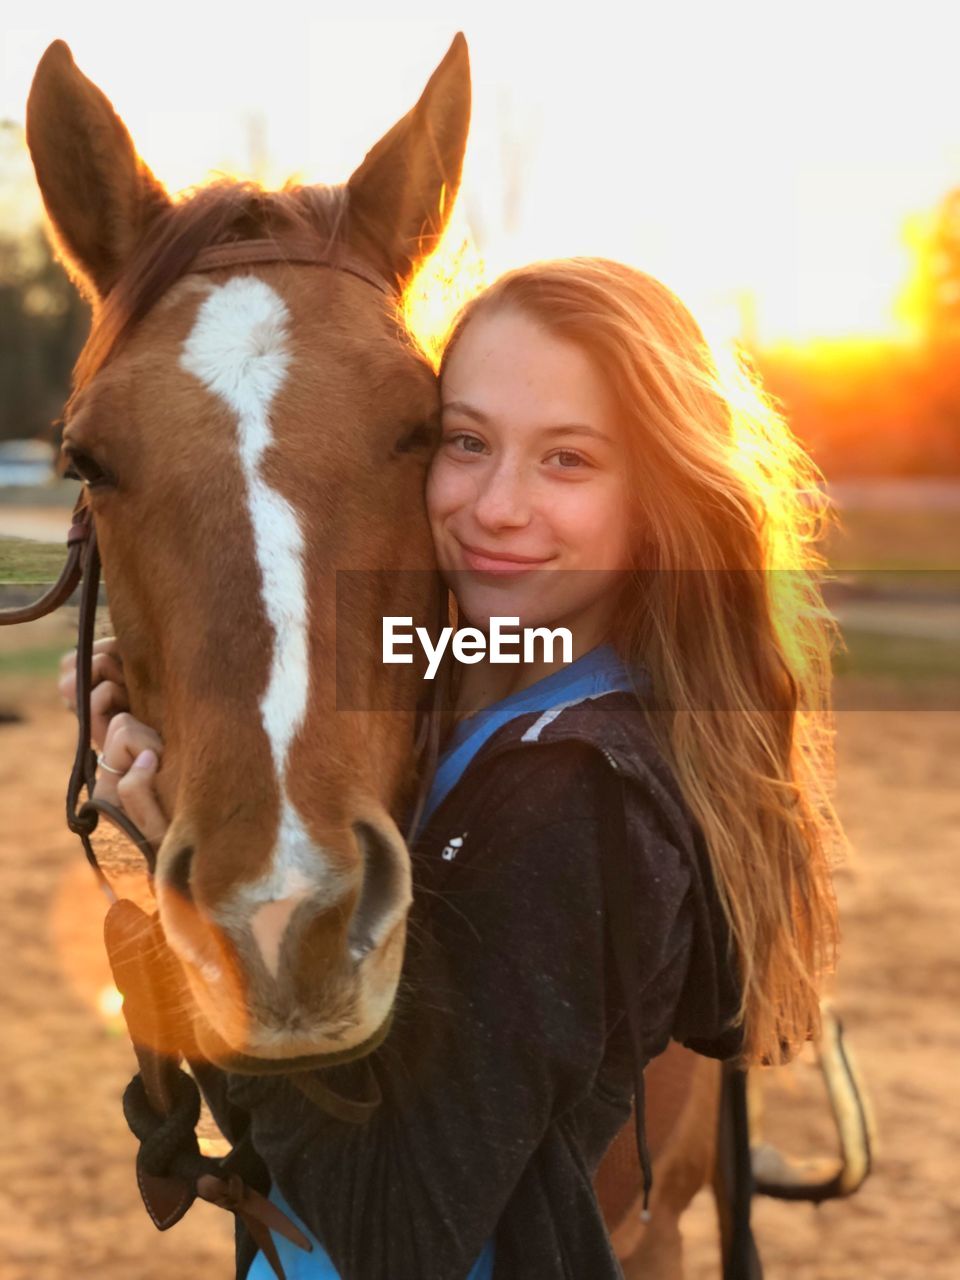 Portrait of smiling teenage girl embracing horse during sunset